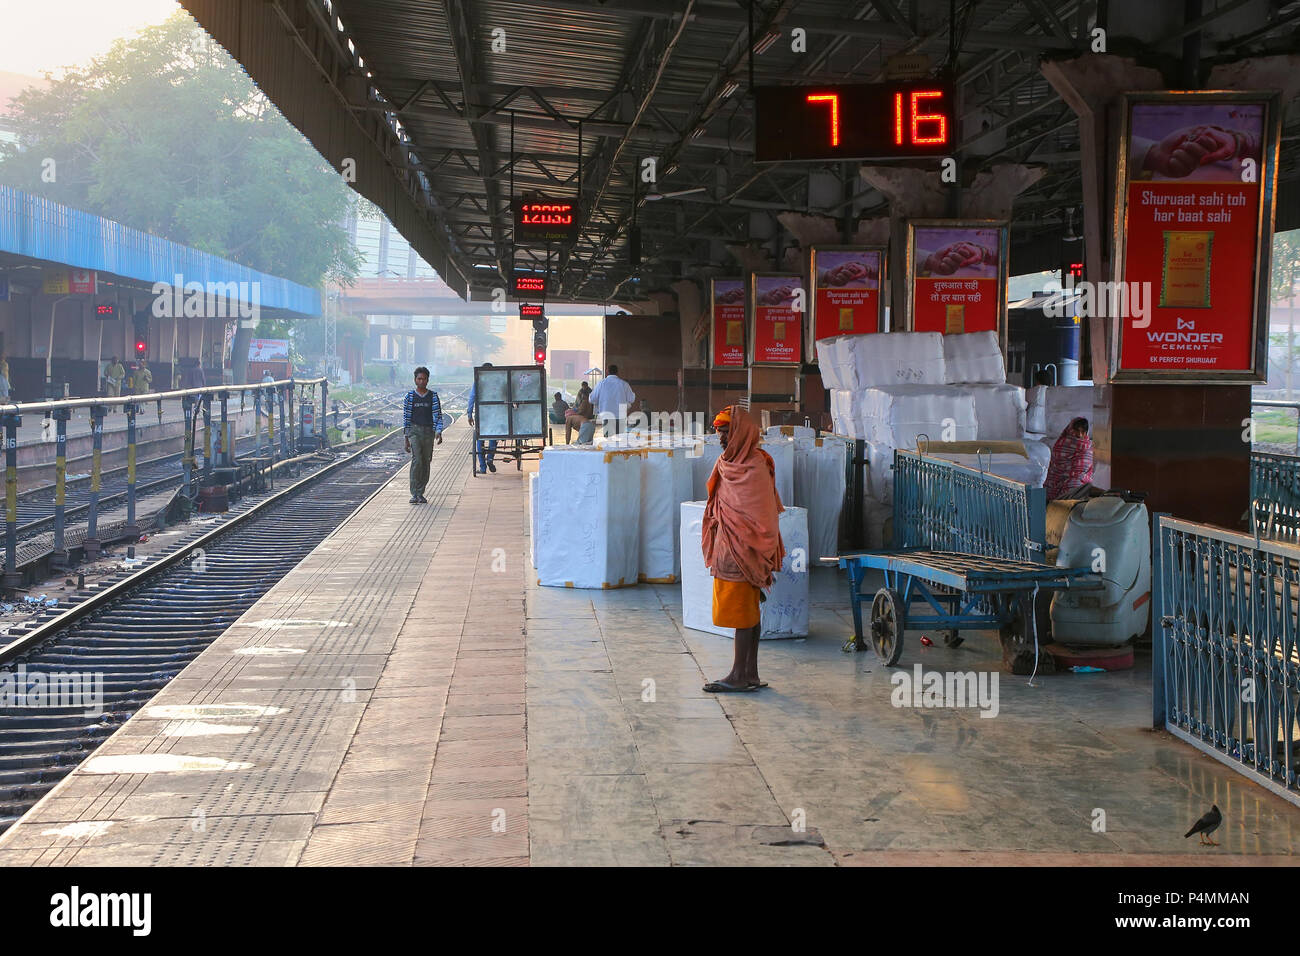 Passengers waiting for the trains at Jaipur Junction Railway Station in Rajasthan, India.  Jaipur station alone deals with 35,000 passengers in a day. Stock Photo